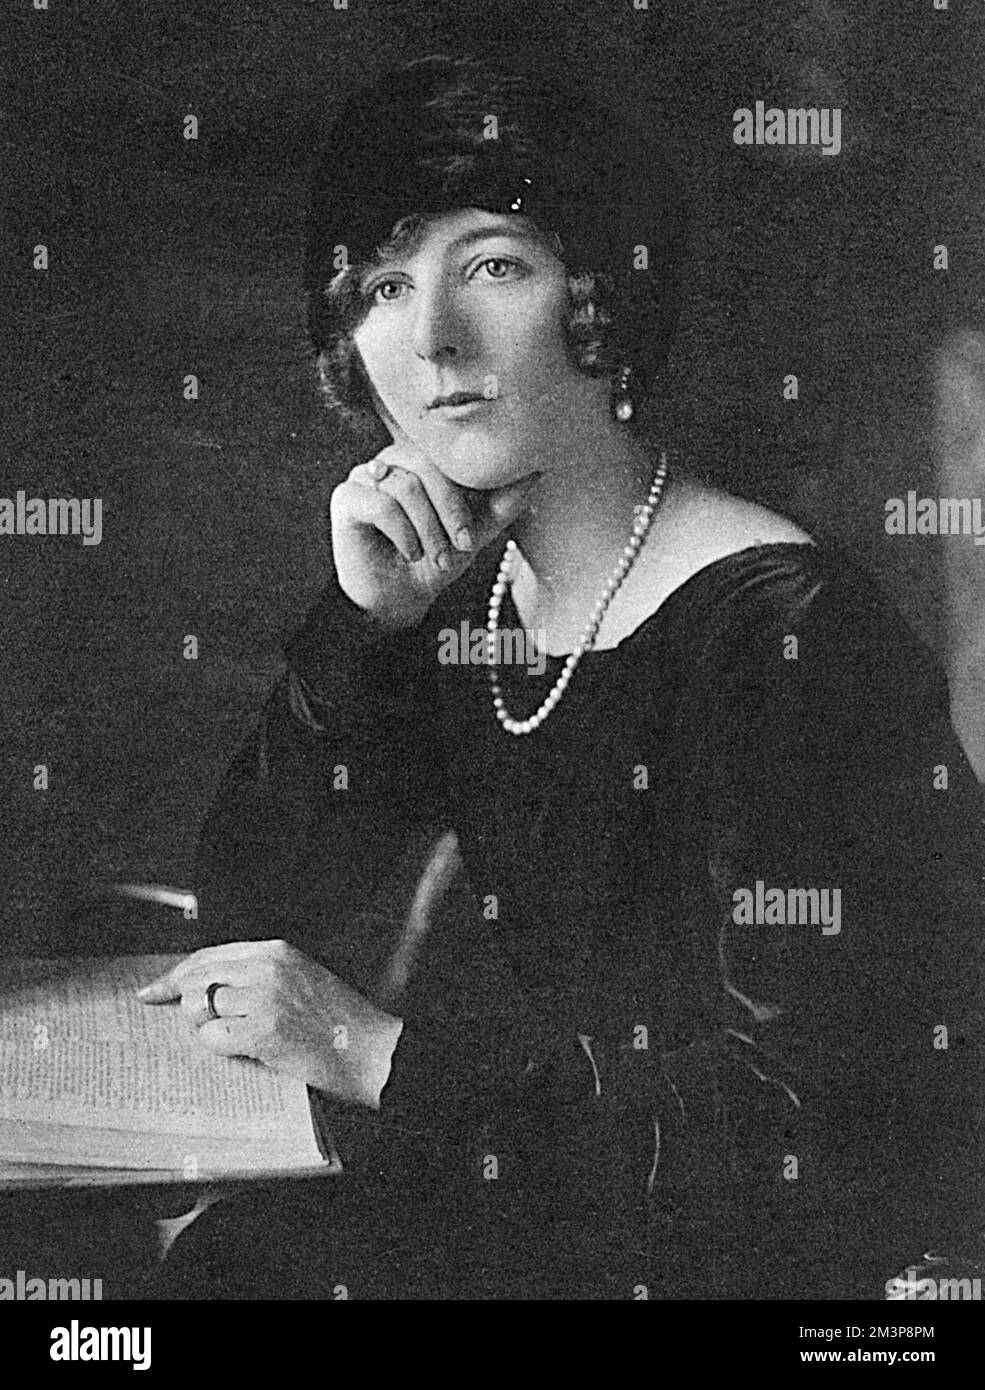 Lady Idina Wallace, nee Sackville, eldest daughter of Lord de la Warr, and wife of Captain David Euan Wallace of the Household Cavalry. She married him, her first husband, in 1913, but divorced in 1919. Five-times married Idina would gain notoriety as part of the Happy Valley Set when she moved to Kenya in 1924 with her third husband, Josslyn Hay, Earl of Errol. With her serial marriages and reputation for debauched decadence, she inspired the character of 'The Bolter' in Nancy Mitford's novels, The Pursuit of Love and Love in a Cold Climate, Evelyn Waugh's Vile Bodies and the character Iris S Stock Photo